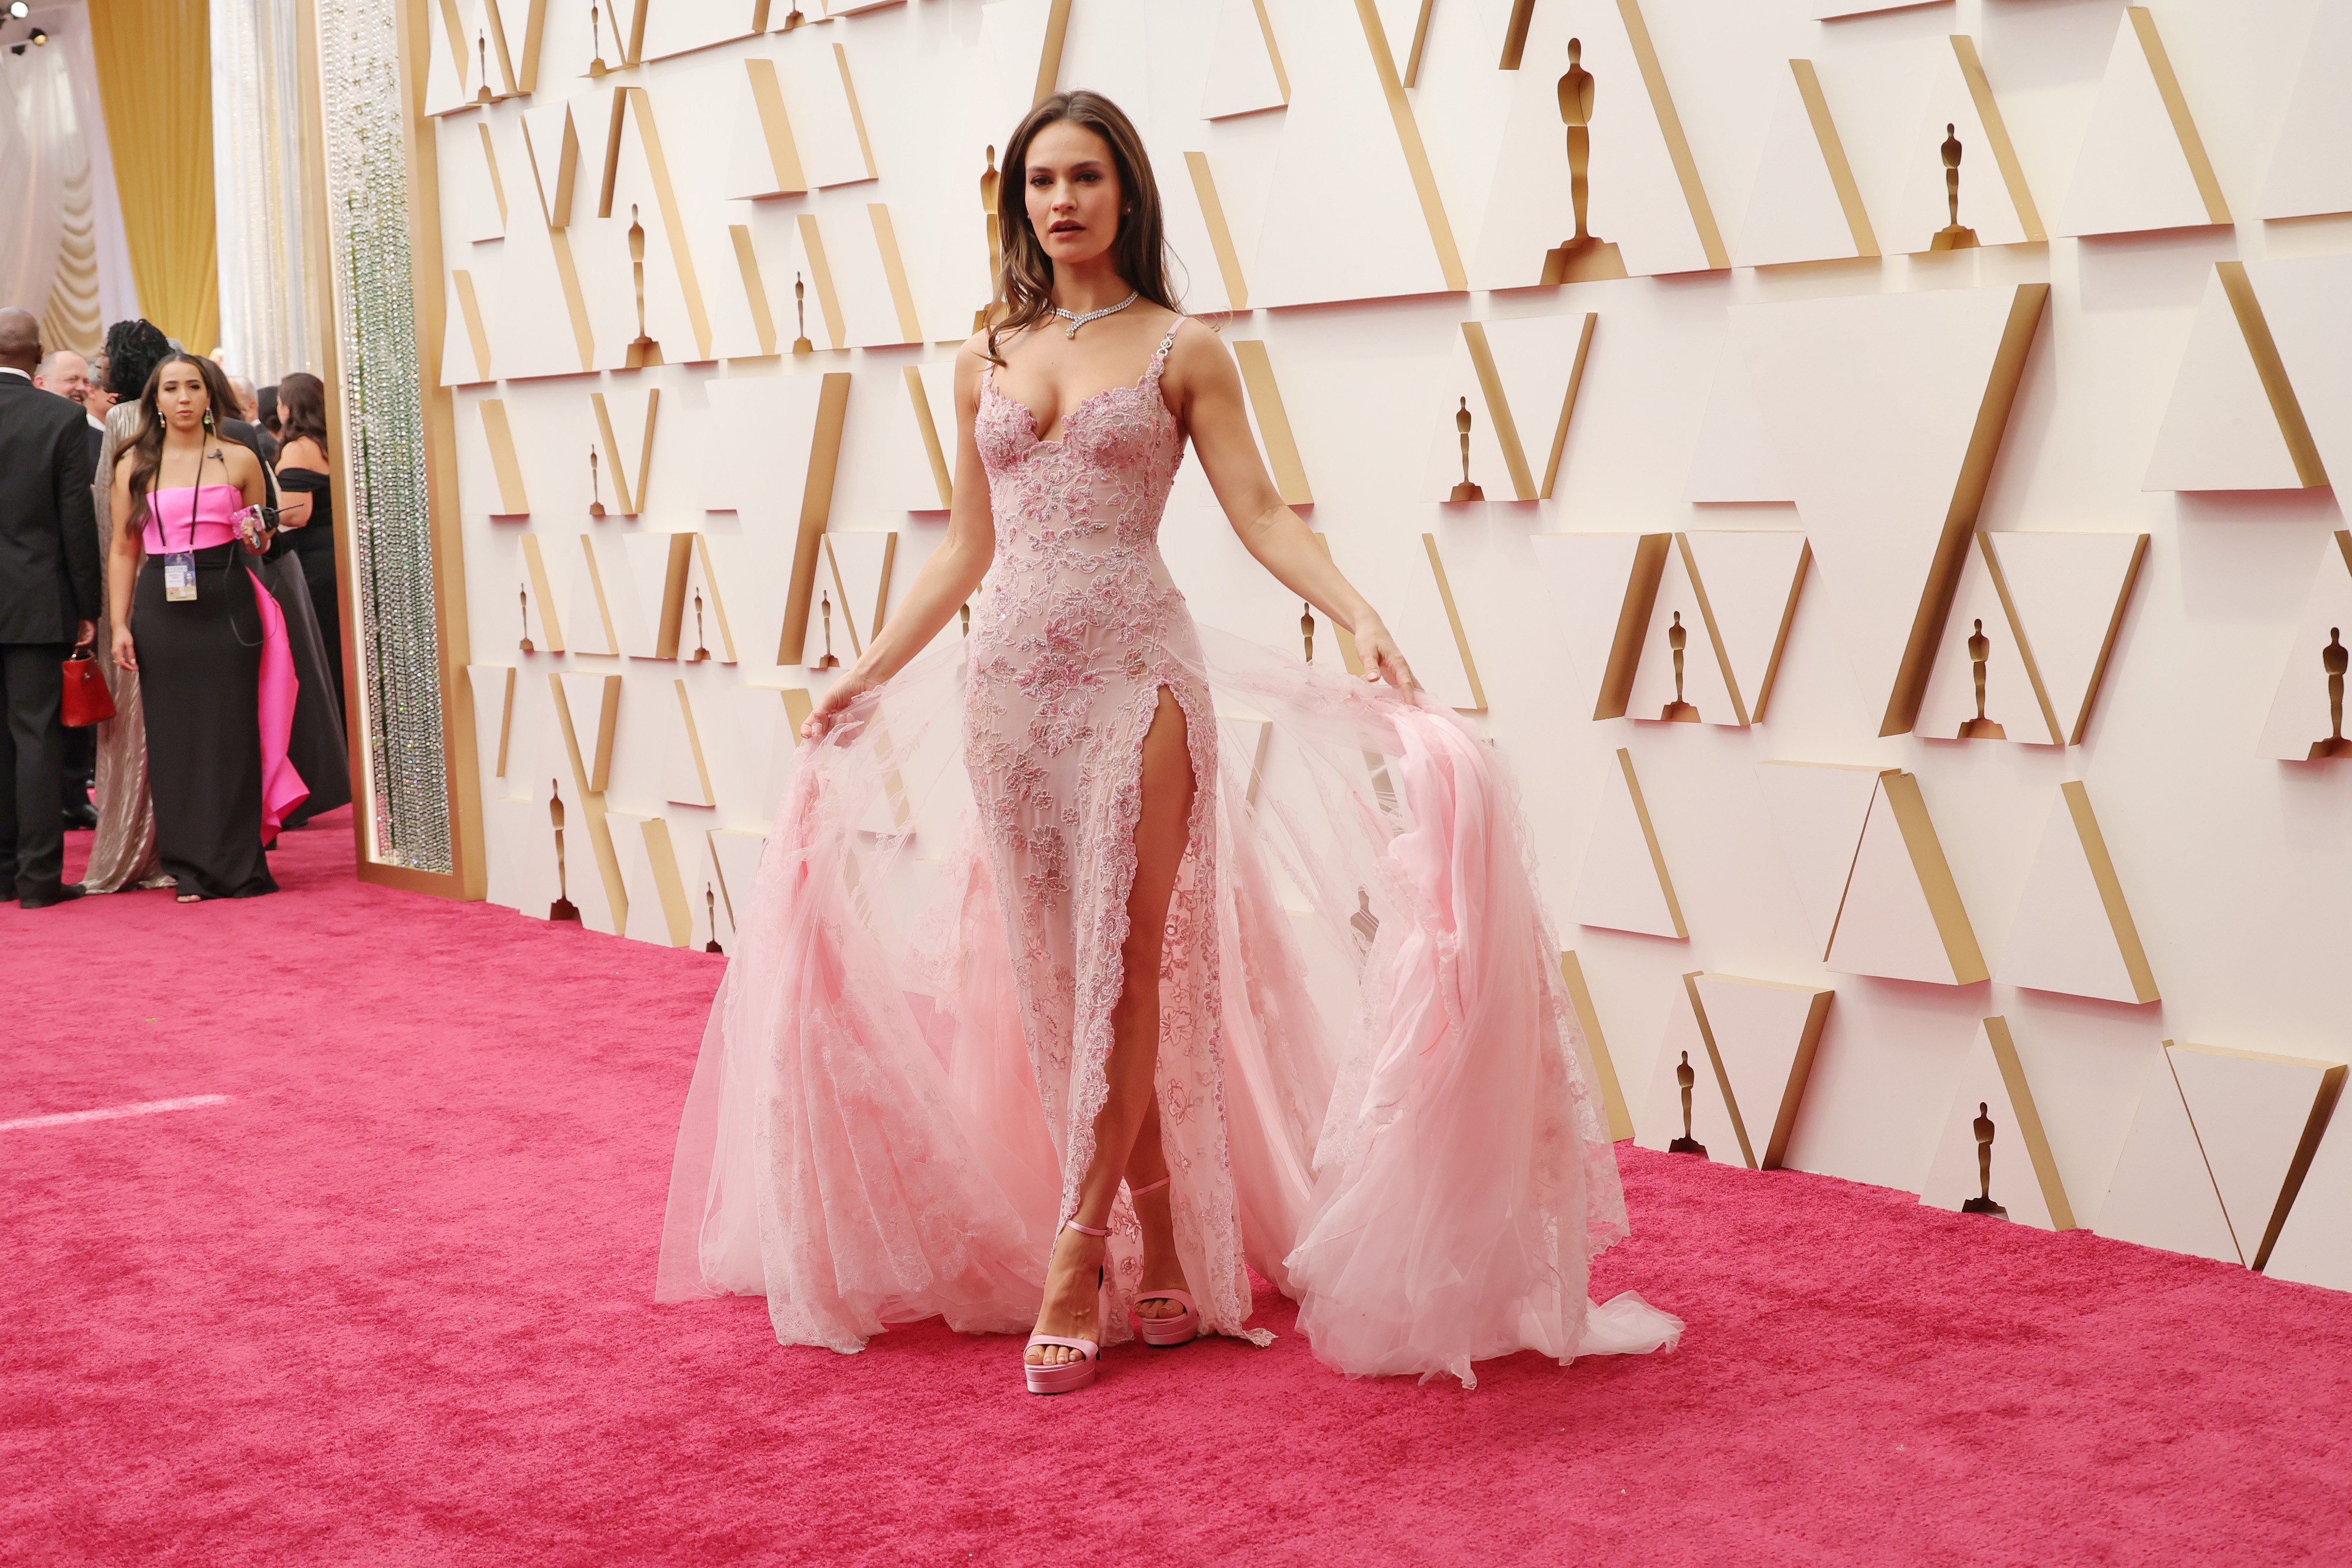 HOLLYWOOD, CALIFORNIA - MARCH 27: Lily James attends the 94th Annual Academy Awards at Hollywood and Highland on March 27, 2022 in Hollywood, California. (Photo by Mike Coppola/Getty Images) (Foto: Getty Images)